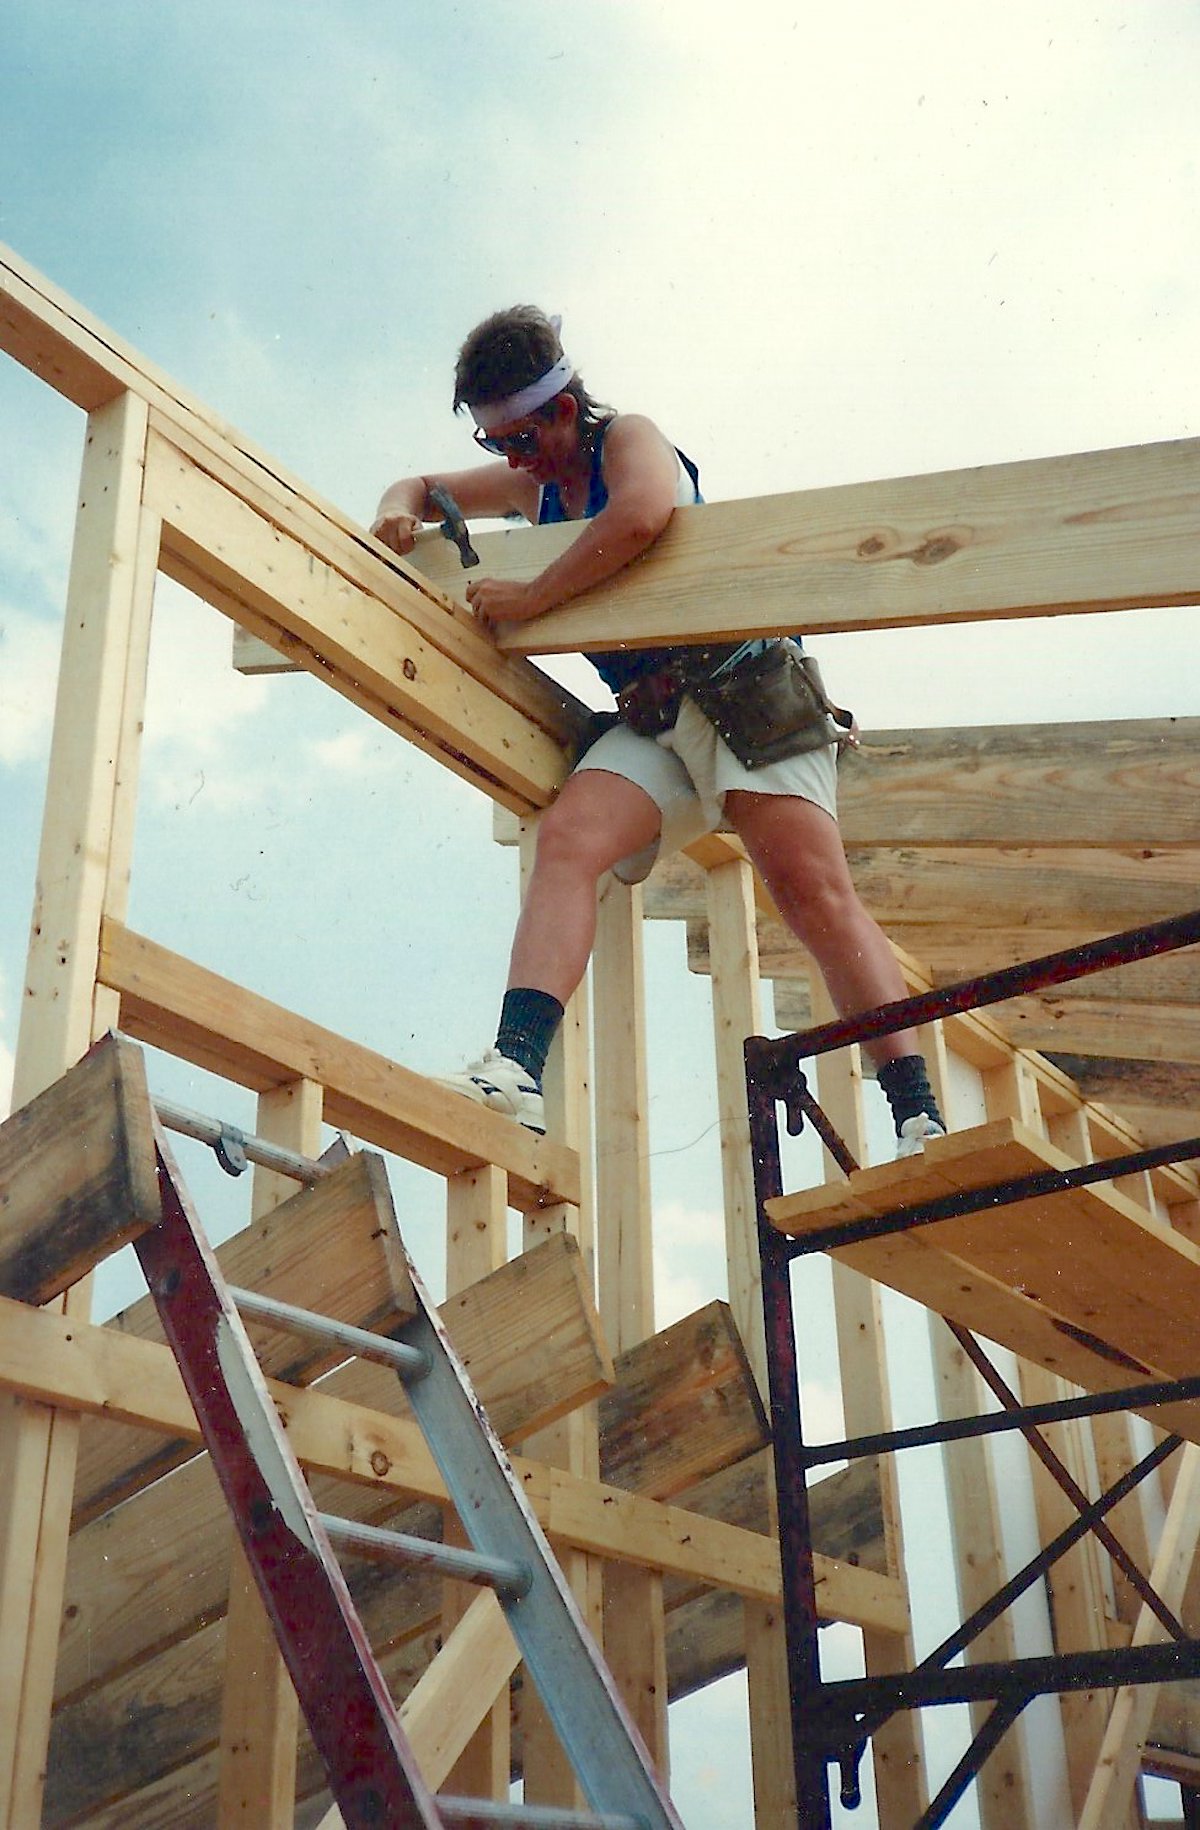 Kim (age 32) building her house in Willisburg, KY, 1989.